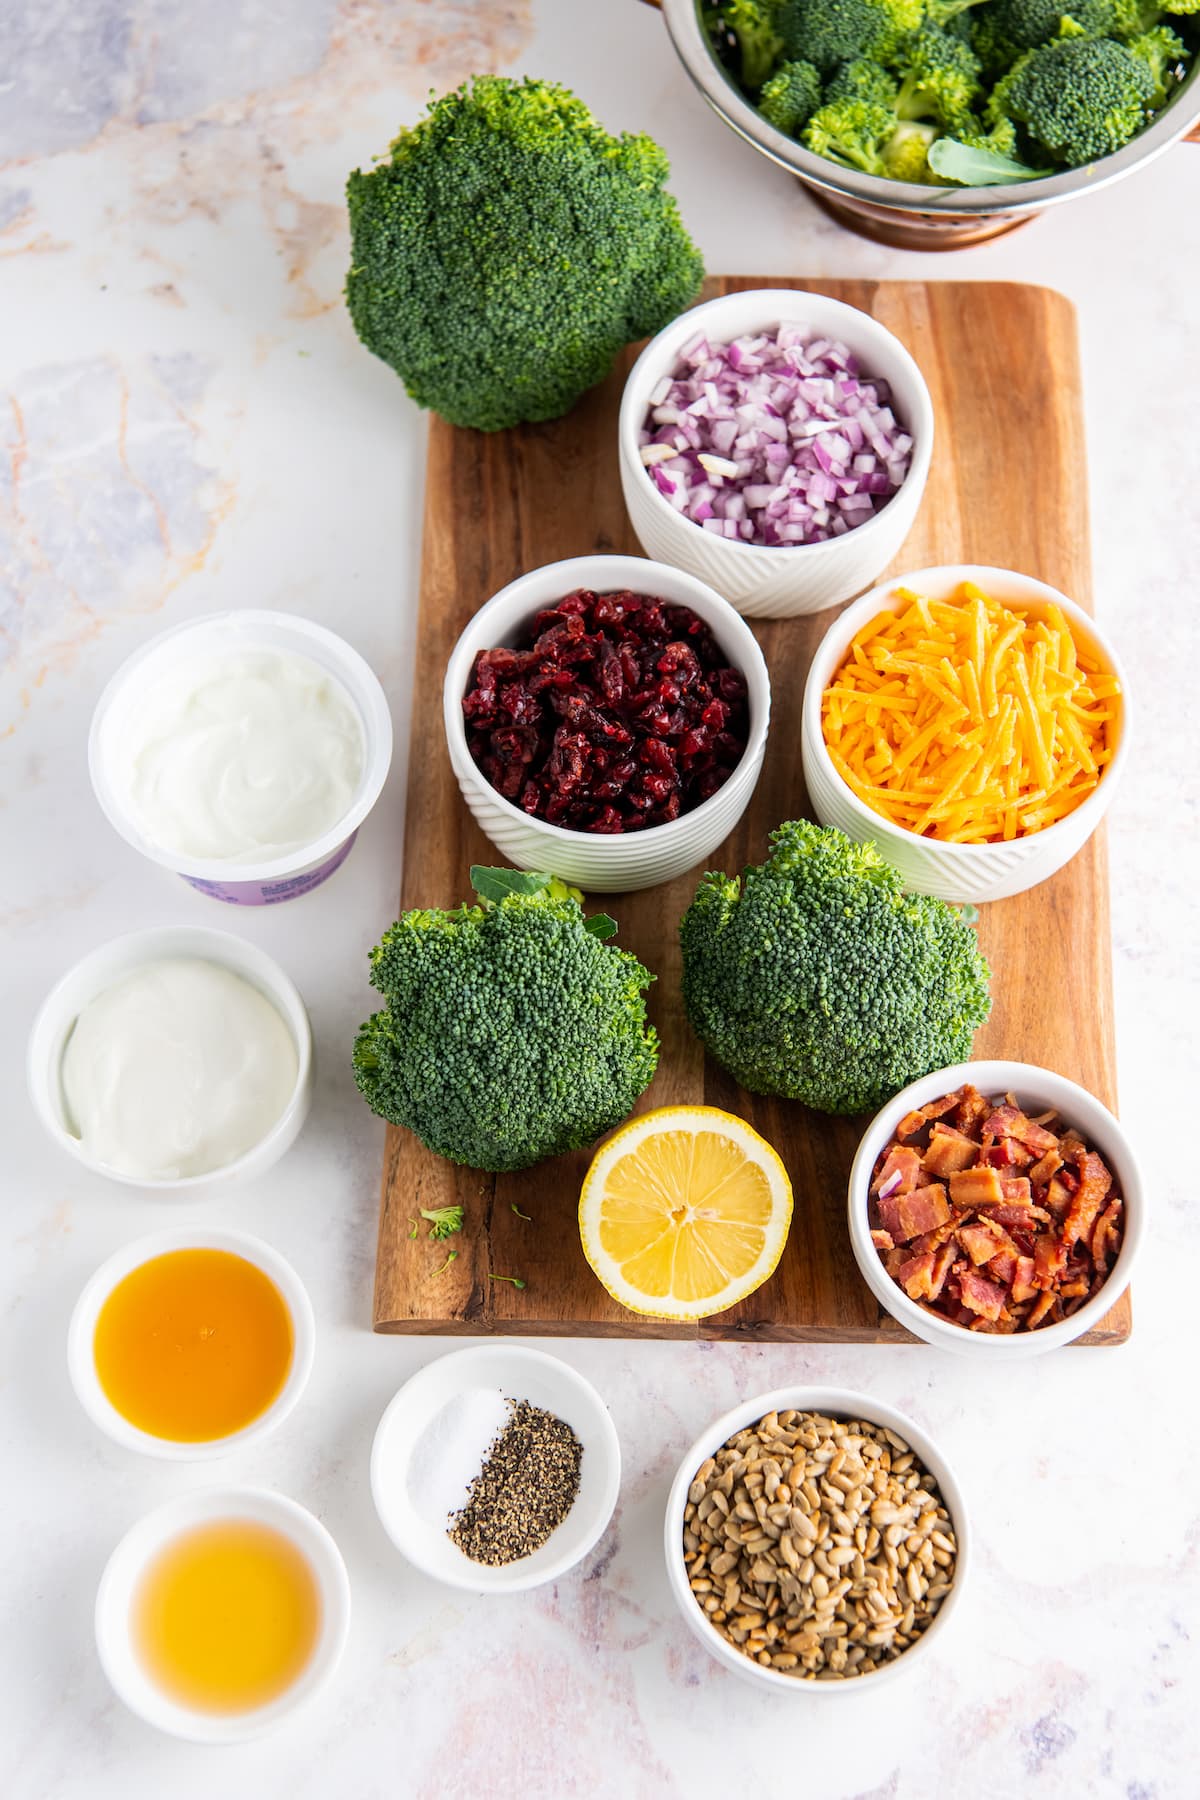 top view of a display of broccoli, seeds, cranberries, and bacon in seperate bowls on a wooden cutting board